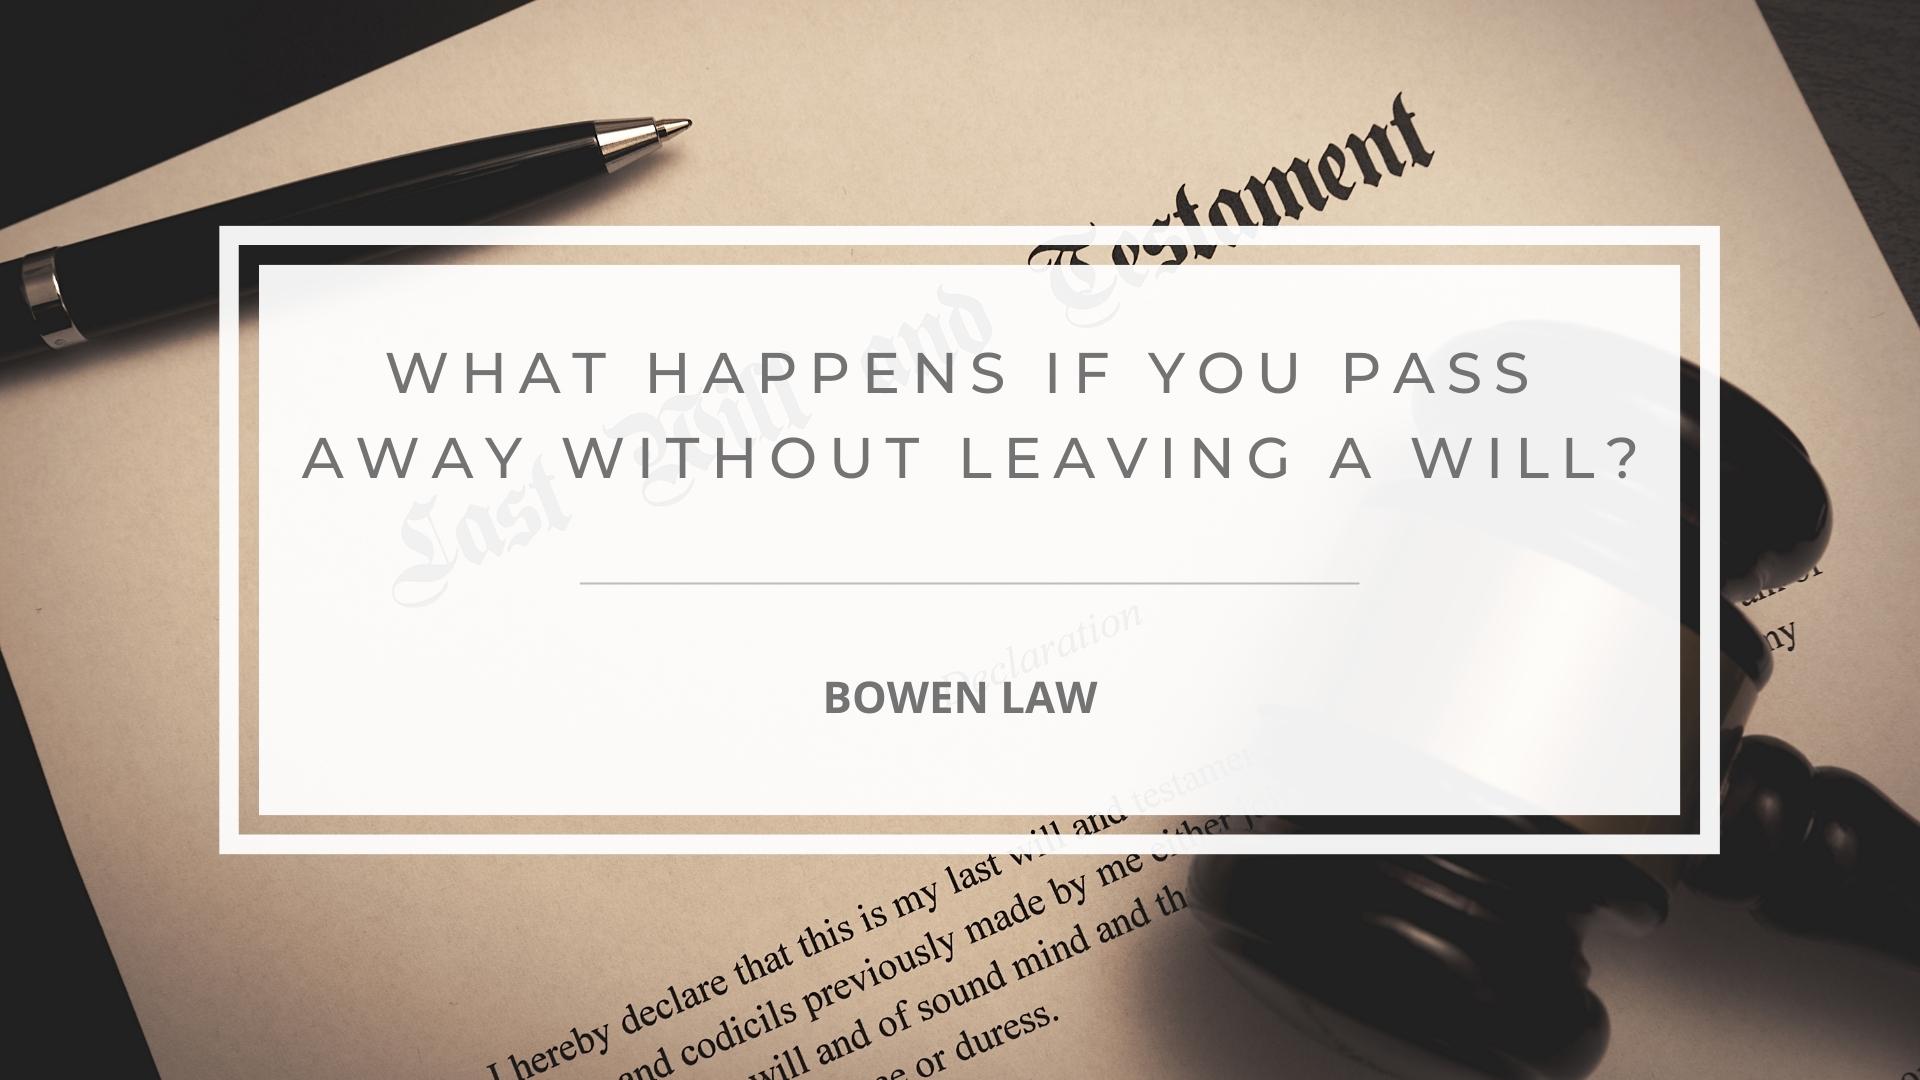 Featured image of what happens if you pass away without leaving a will?